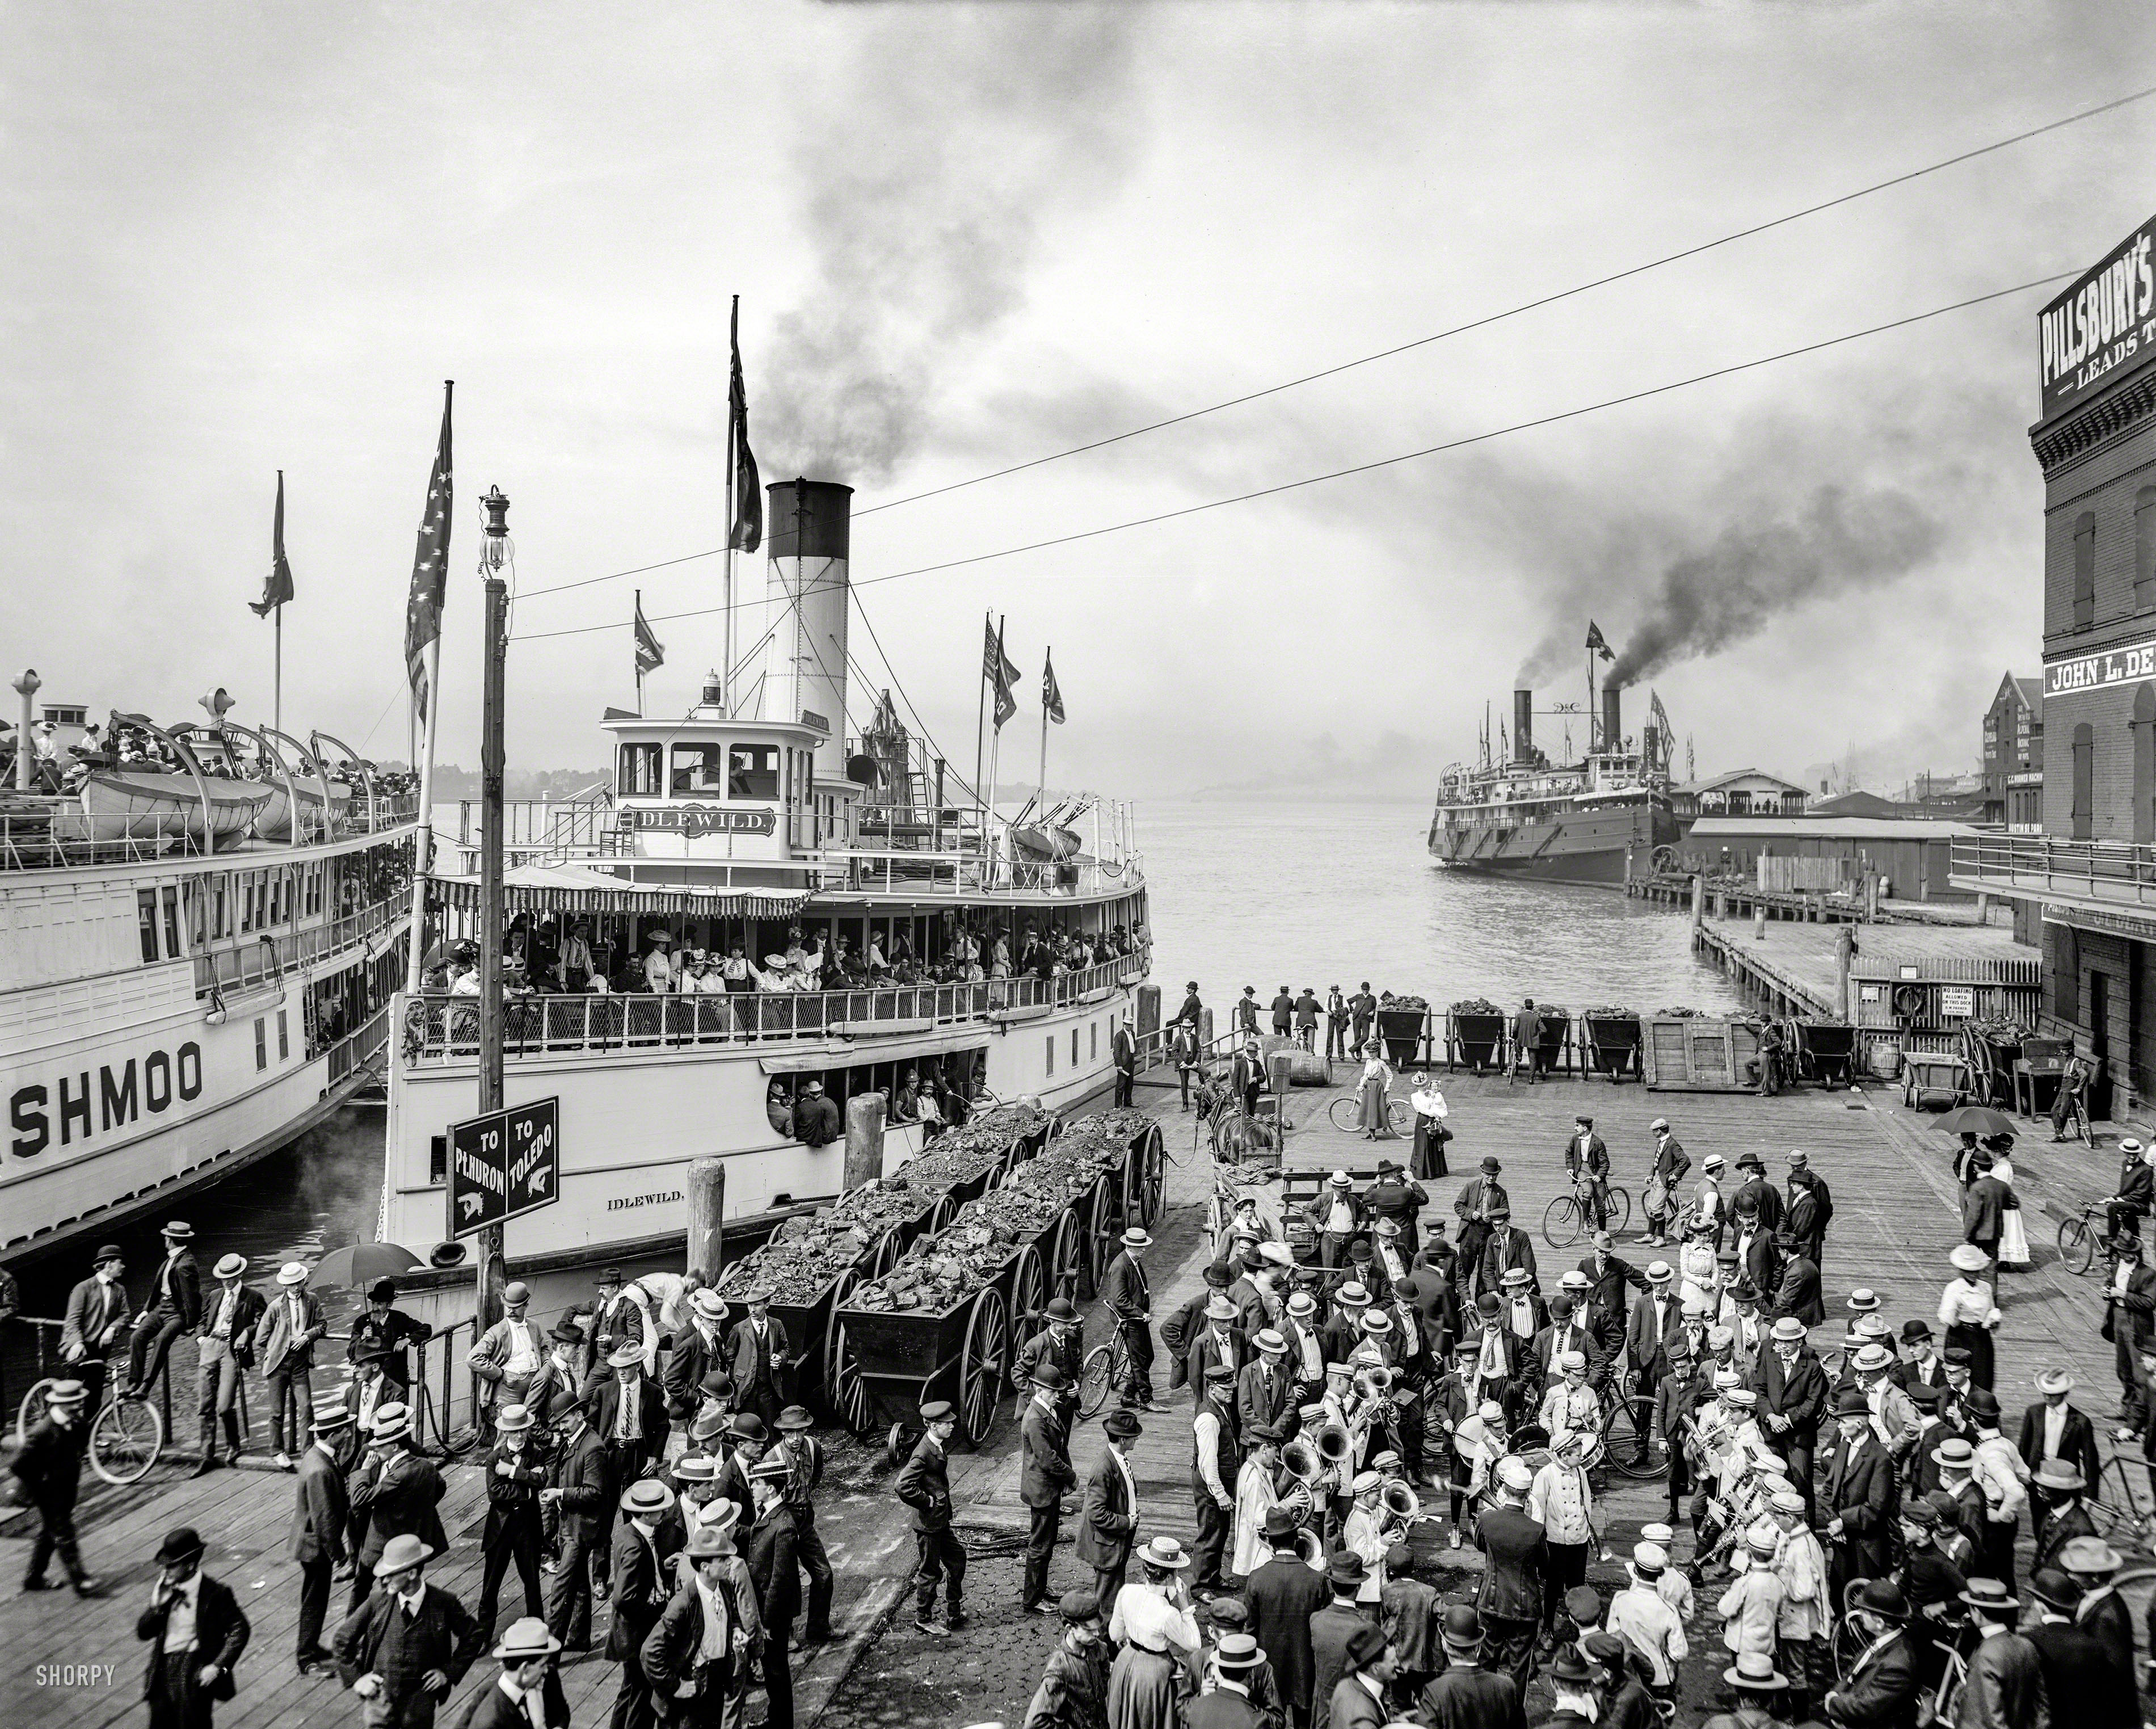 Detroit circa 1901. "Excursion steamers Tashmoo and Idlewild at wharf." No loafing allowed! 8x10 glass negative, Detroit Publishing Co. View full size.